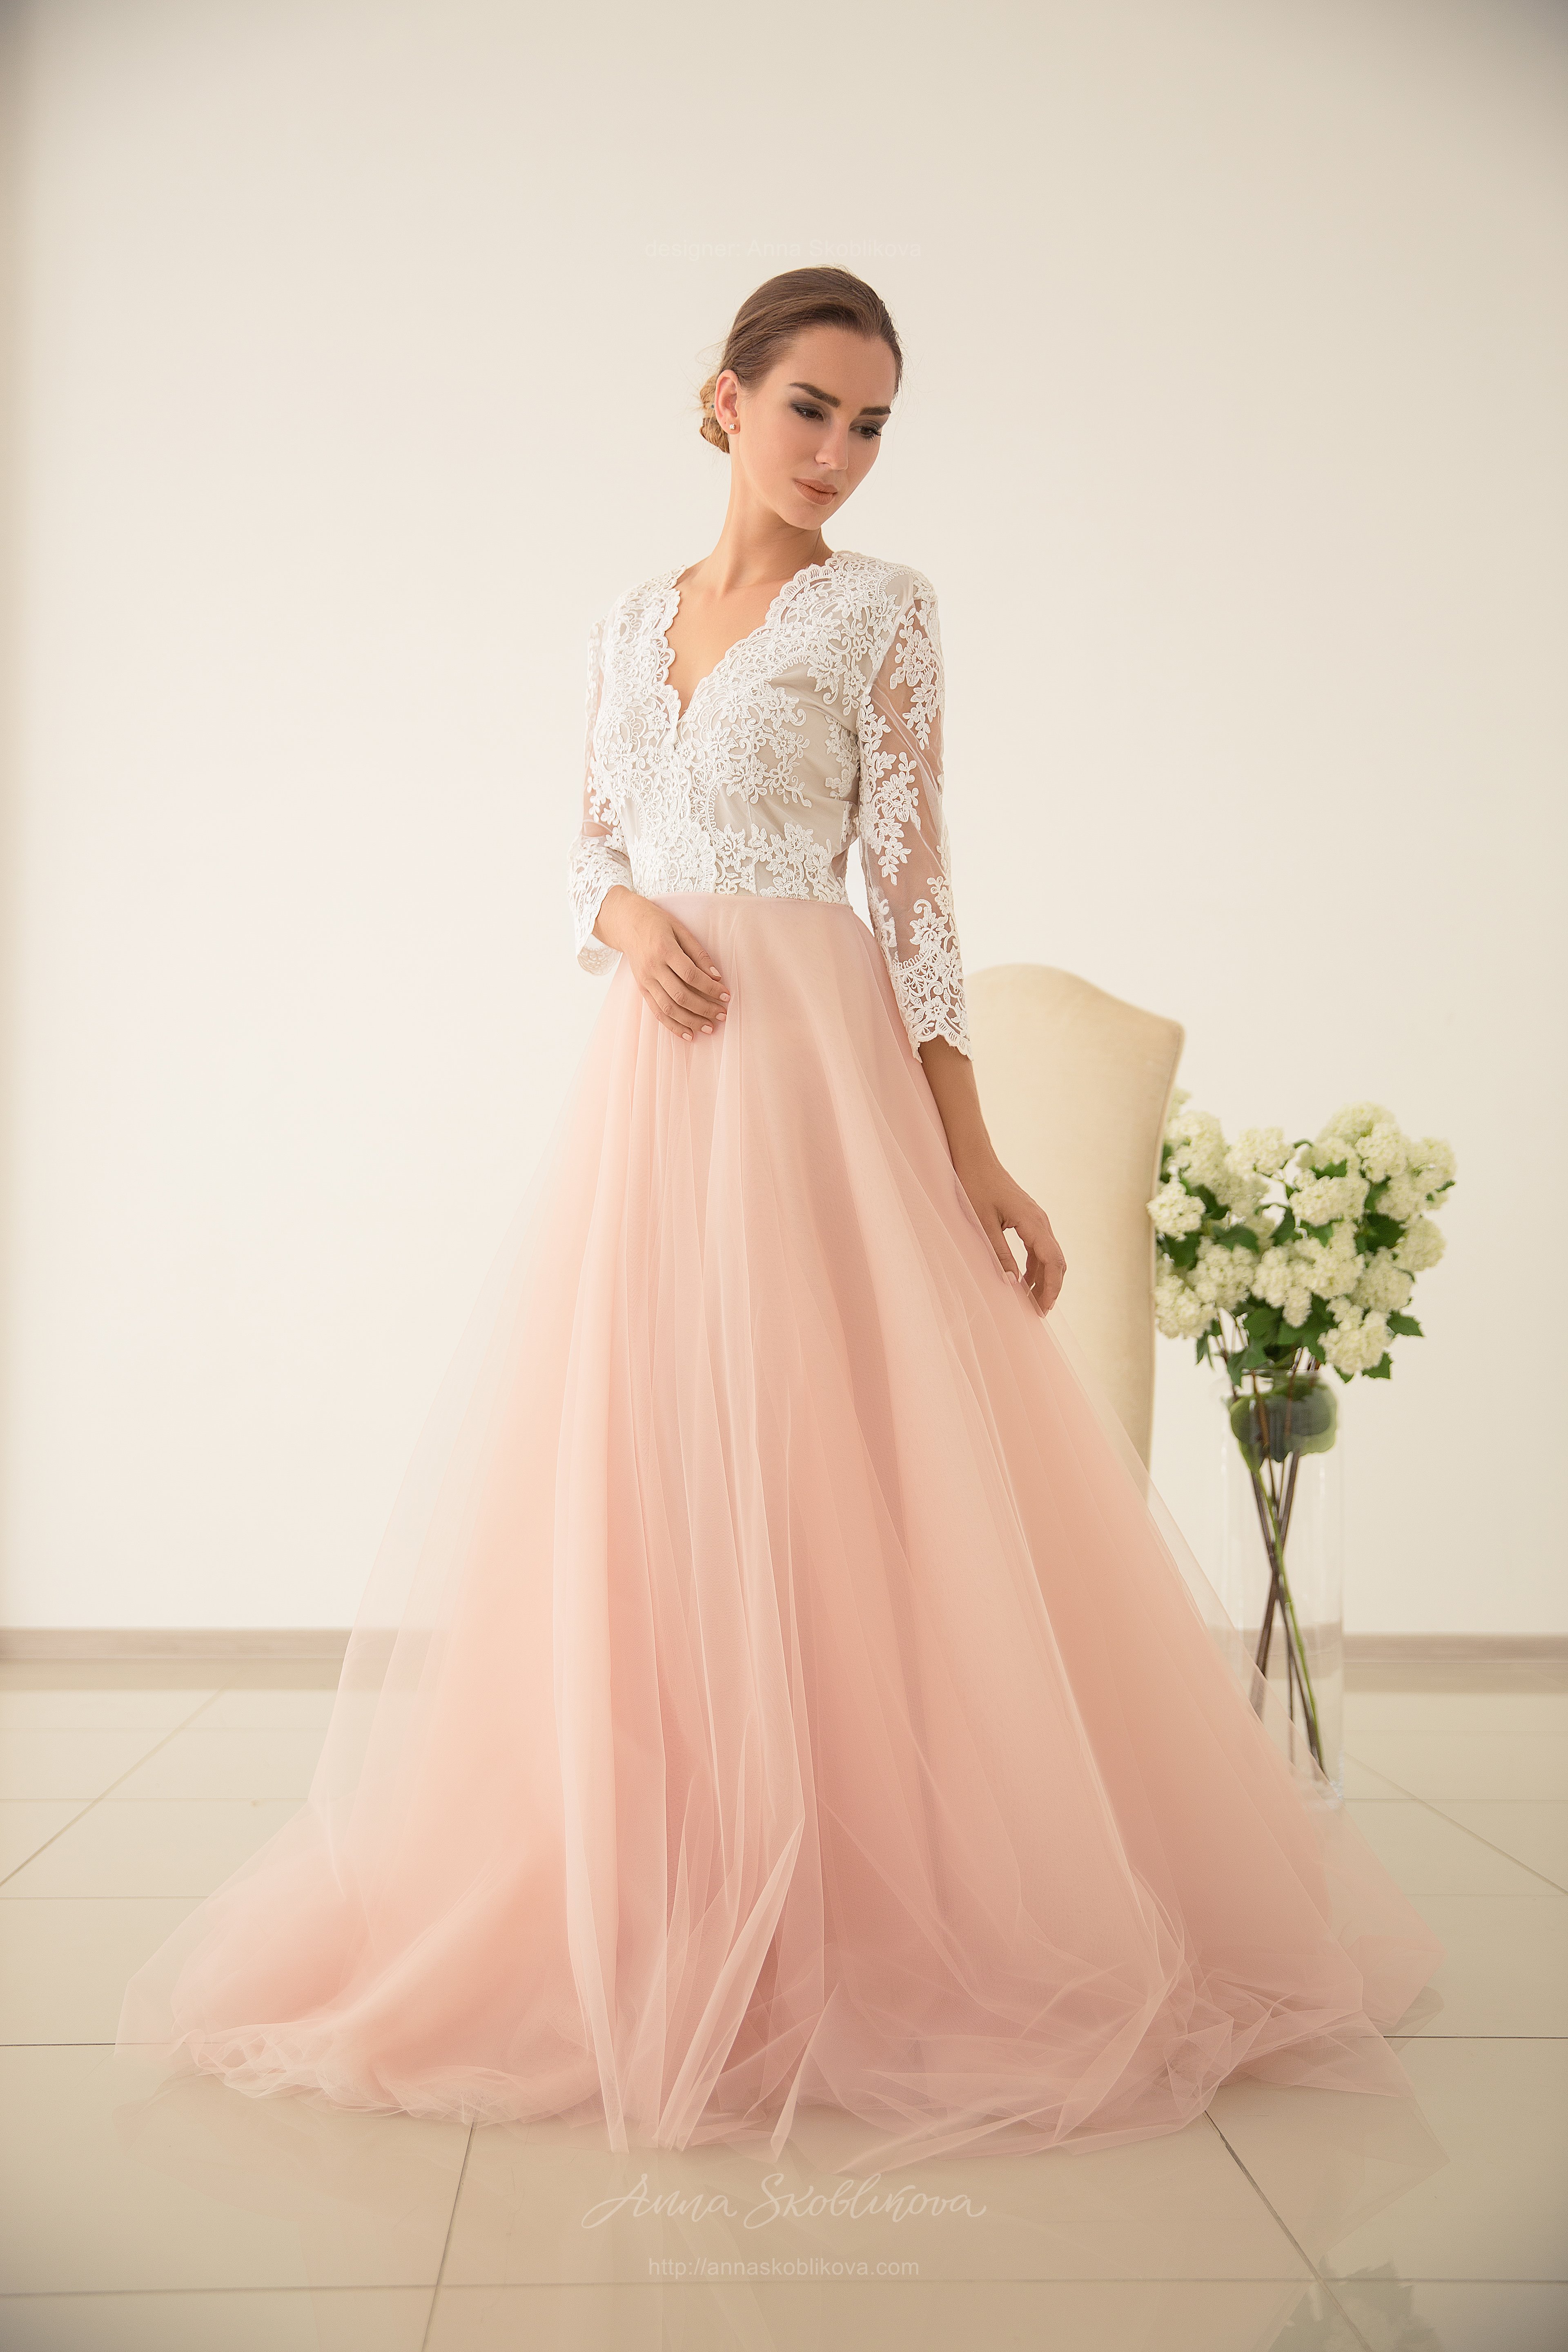 Pink Wedding Dress With Powder Shade Wedding Dresses And Evening Gowns By Anna Skoblikova 4515